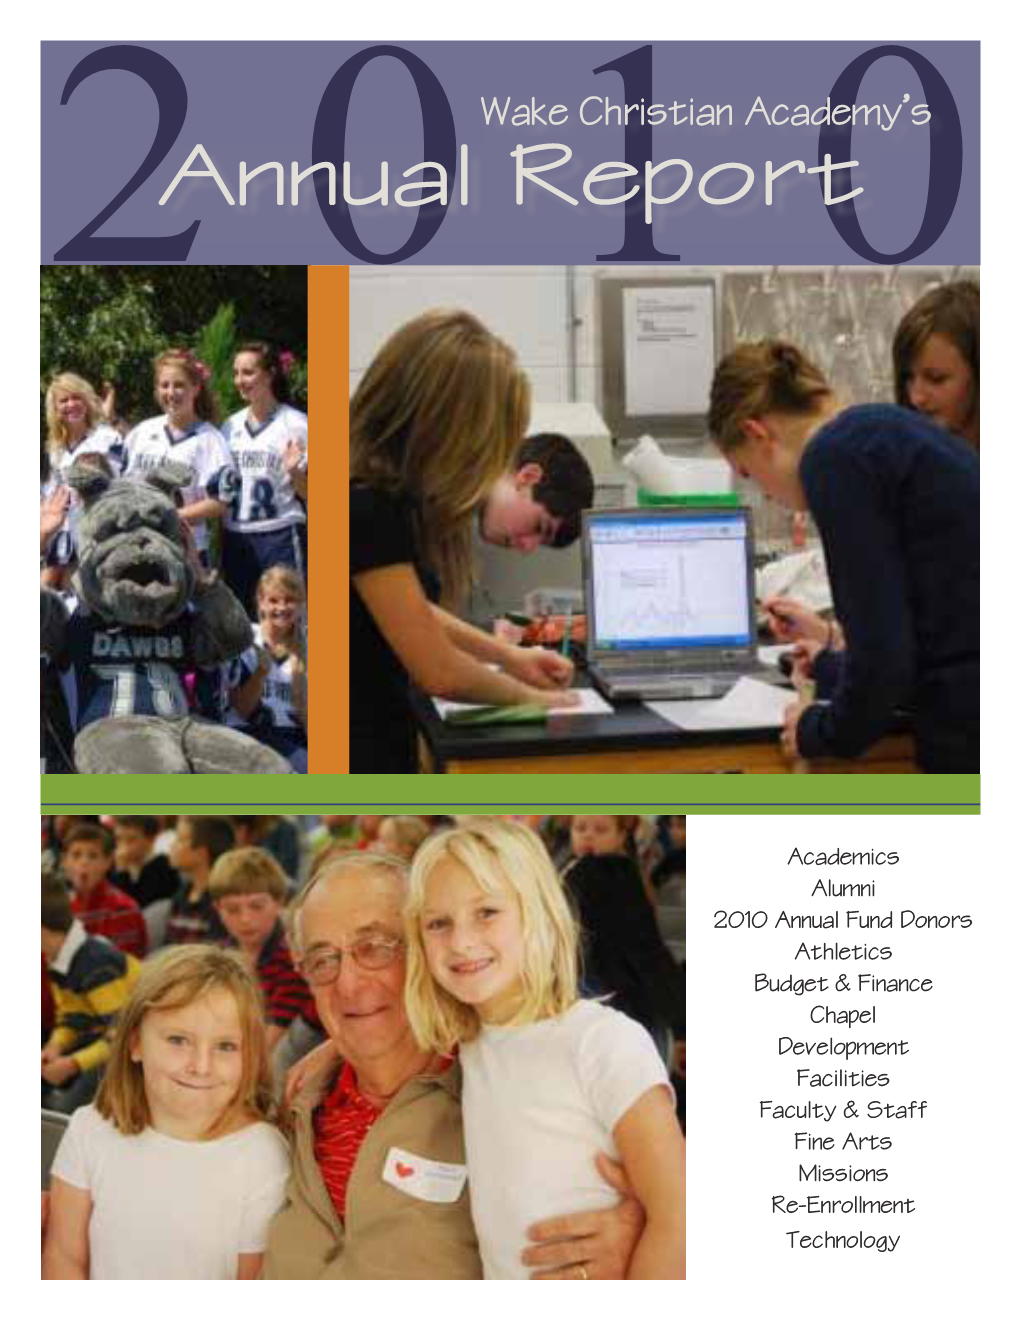 Annual Report Is a Summary of the Events of the Spring Semester of the Previous School Year and the Fall Semester of the Current School Year